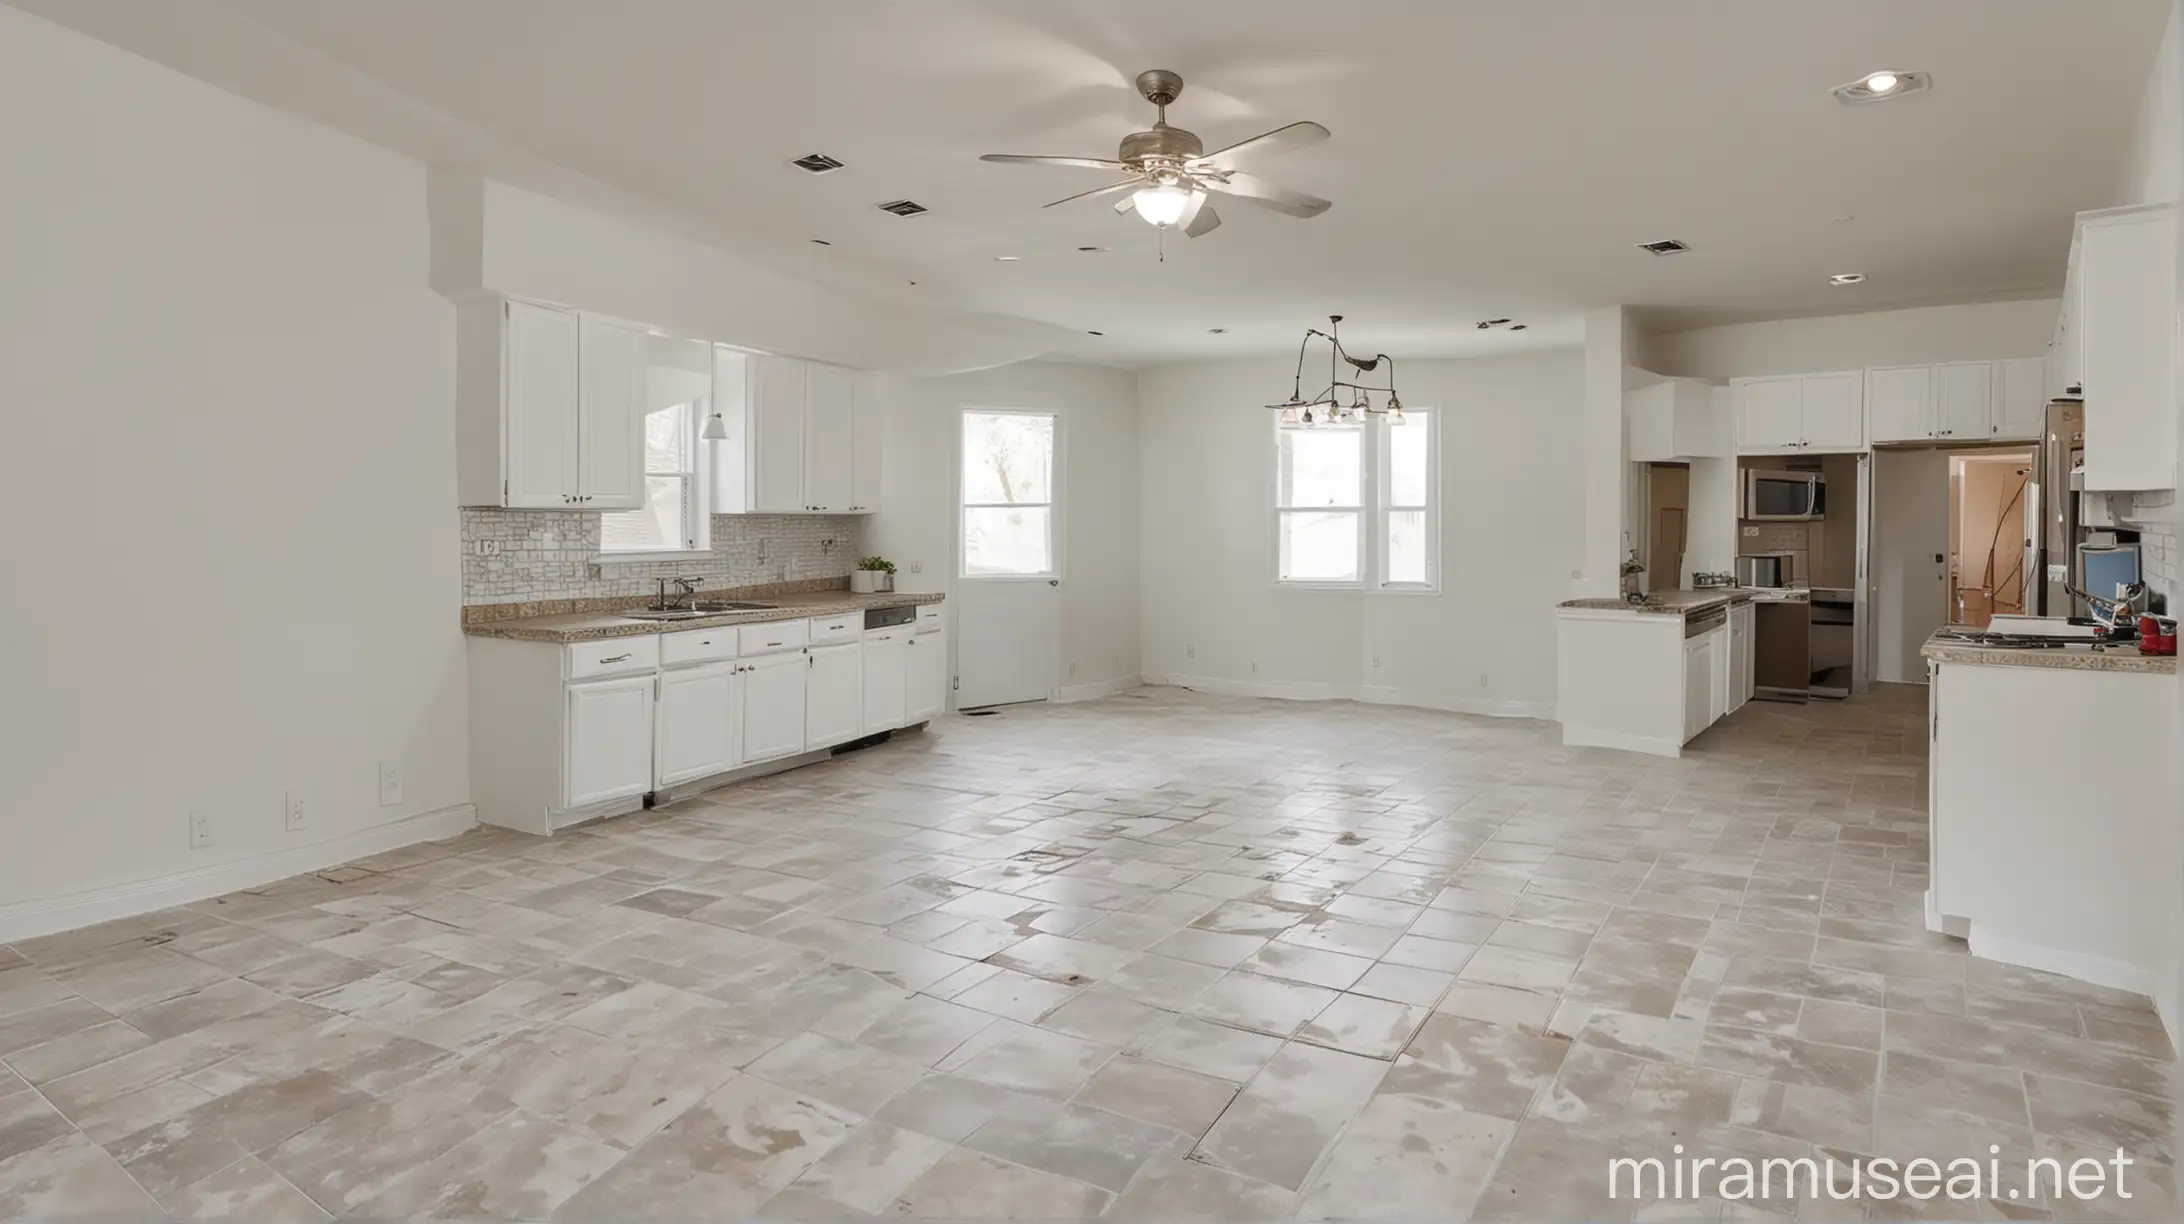 Spacious Empty Kitchen with White Walls and Table